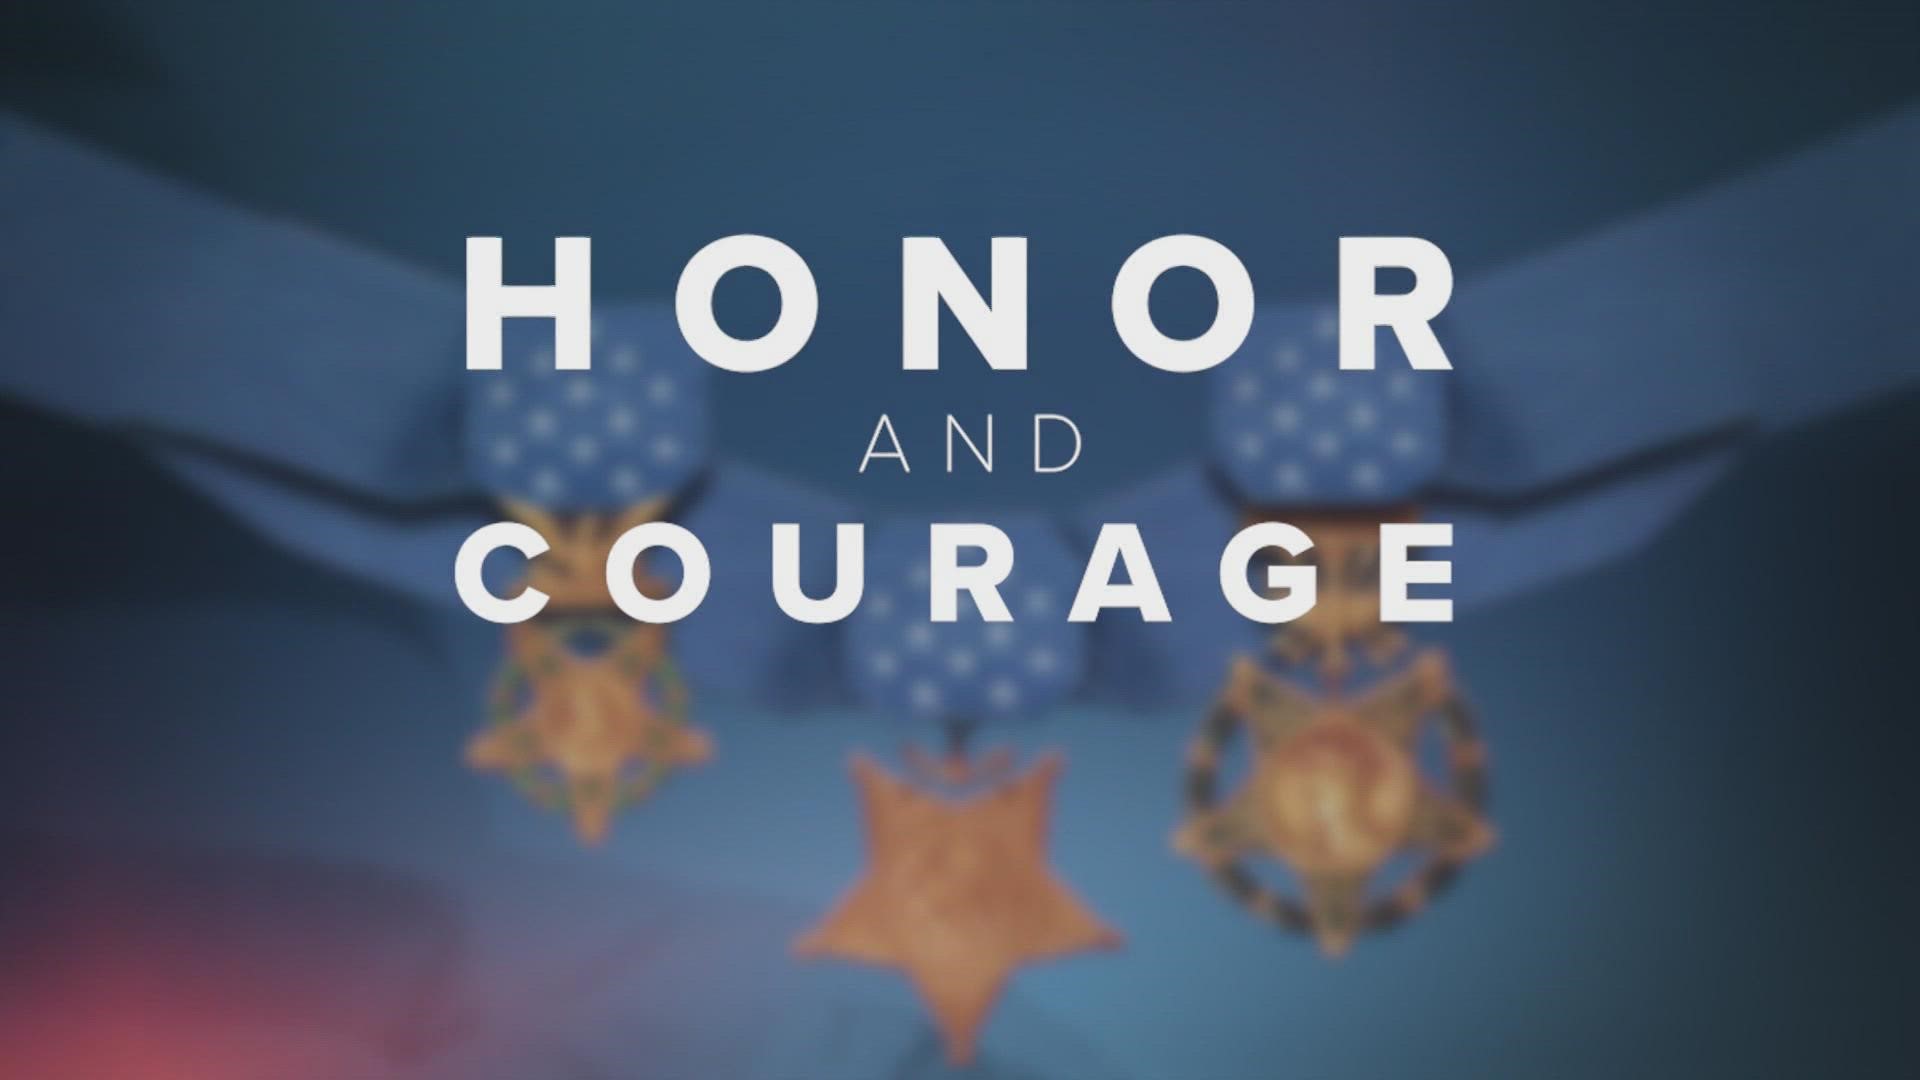 The Medal of Honor is the United States military's highest and rarest award for valor.